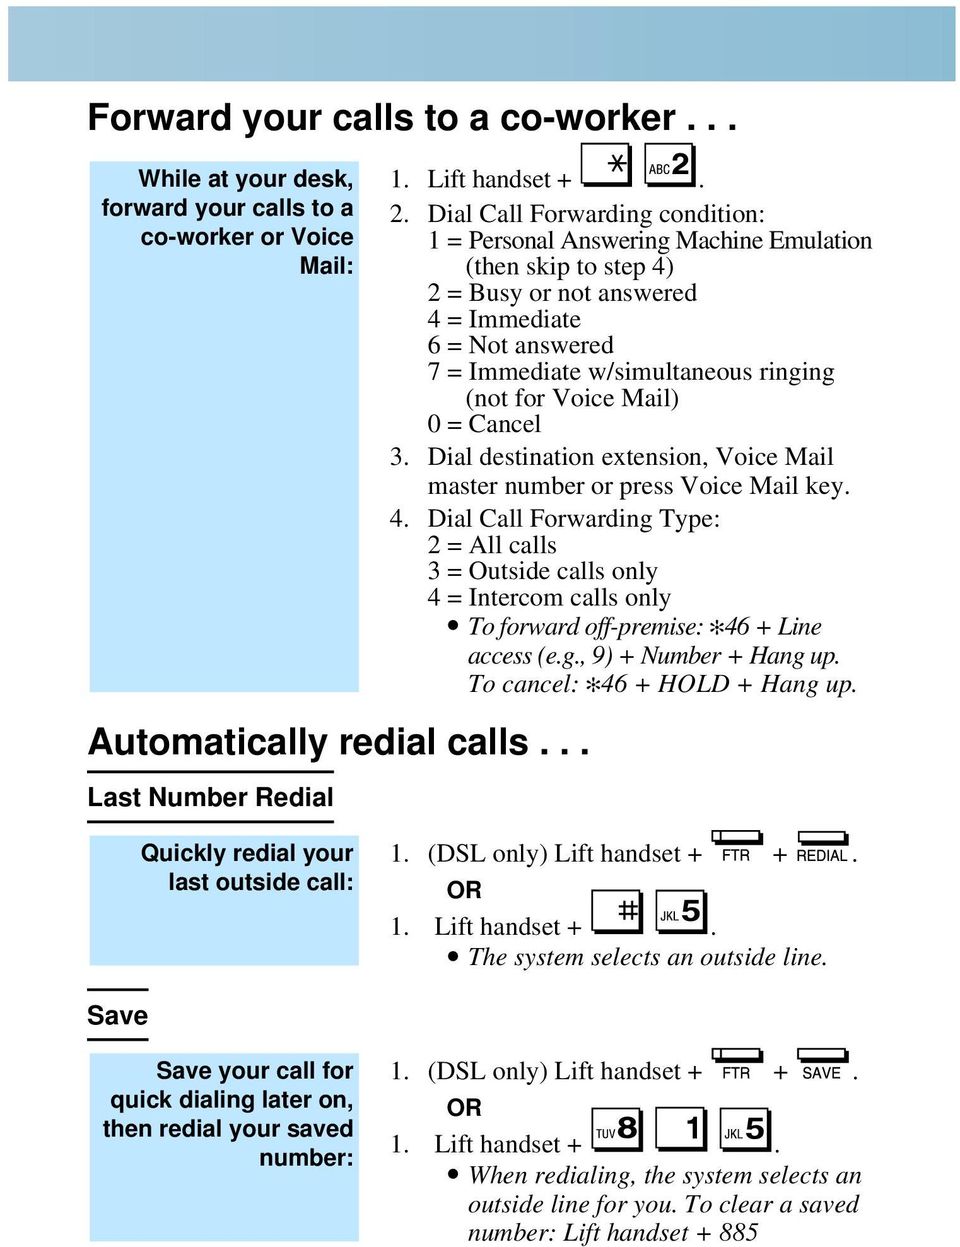 Voice Mail) 0 = Cancel 3. Dial destination extension, Voice Mail master number or press Voice Mail key. 4.